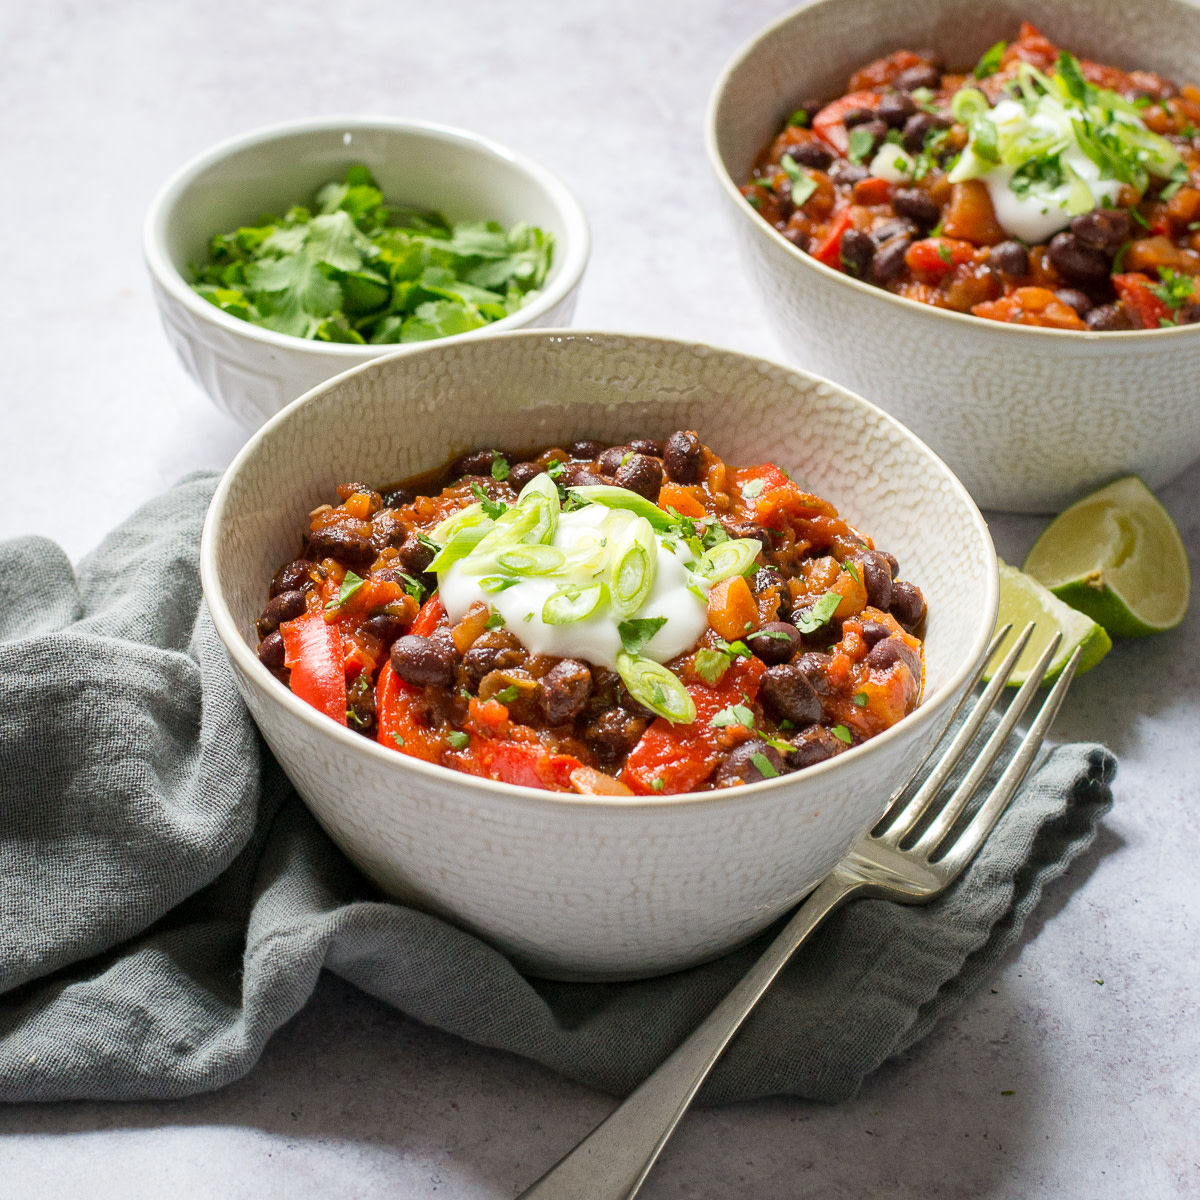 🌱 BLACK BEAN CHILLI with chipotle paste - a 20 minute dinner This smoky and spicy black bean chilli with chipotle paste is quick, easy and so versatile - serve with jacket potato, fajitas, rice or tortilla chips! thevegspace.co.uk/recipe-chipotl… #vegan